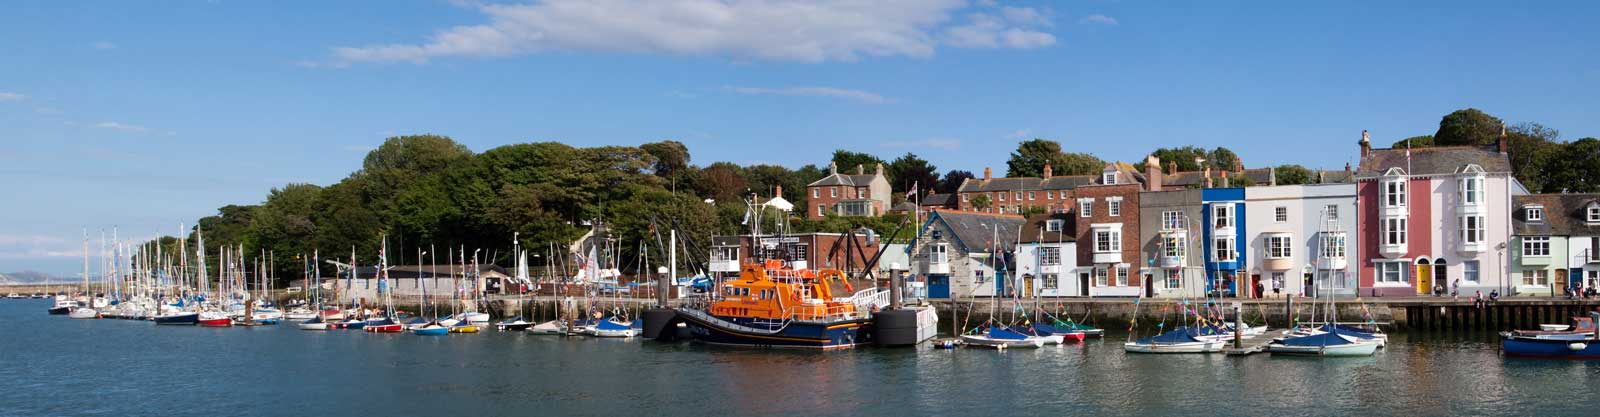 Weymouth-harbour-lifeboat.jpg